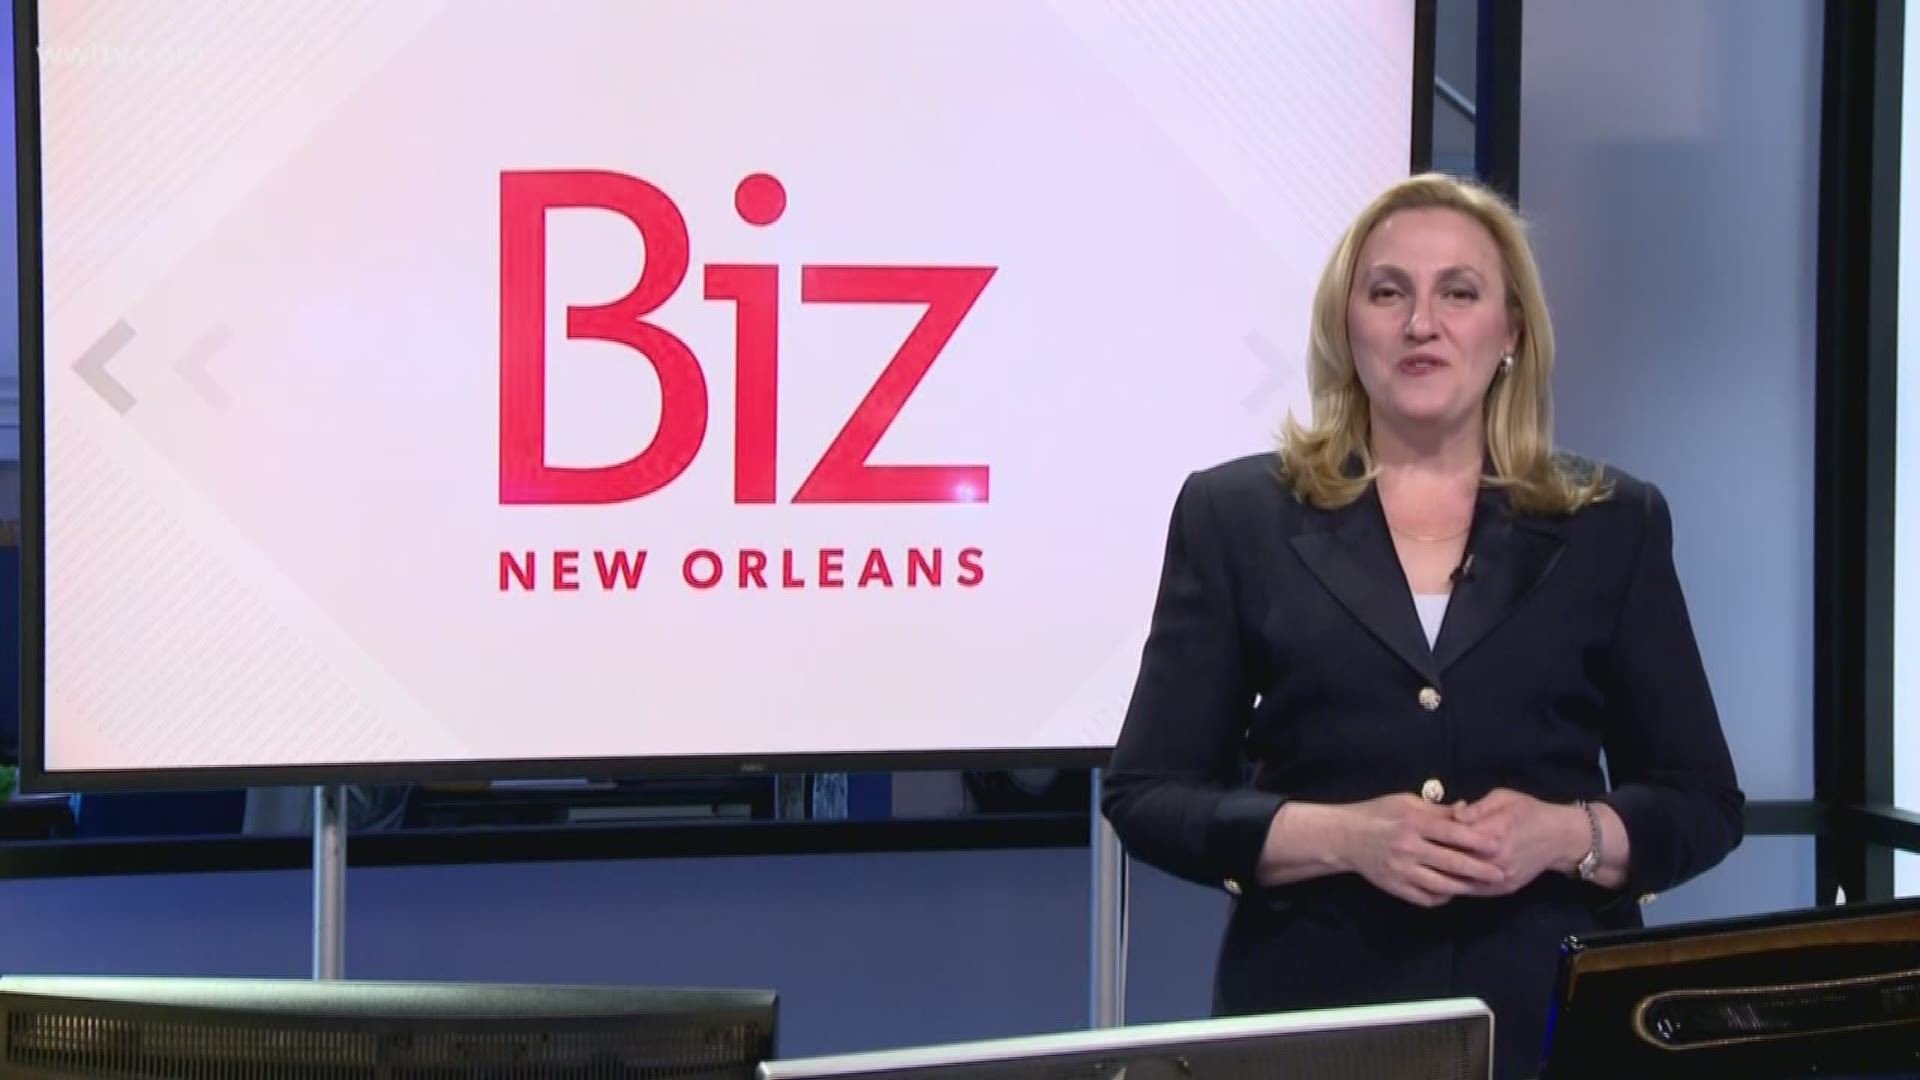 BizNewOrleans.com's Leslie Snadowsky says now is the time to get active and make some important financial changes that could positively affect your tax bill before 2018 comes to a close.